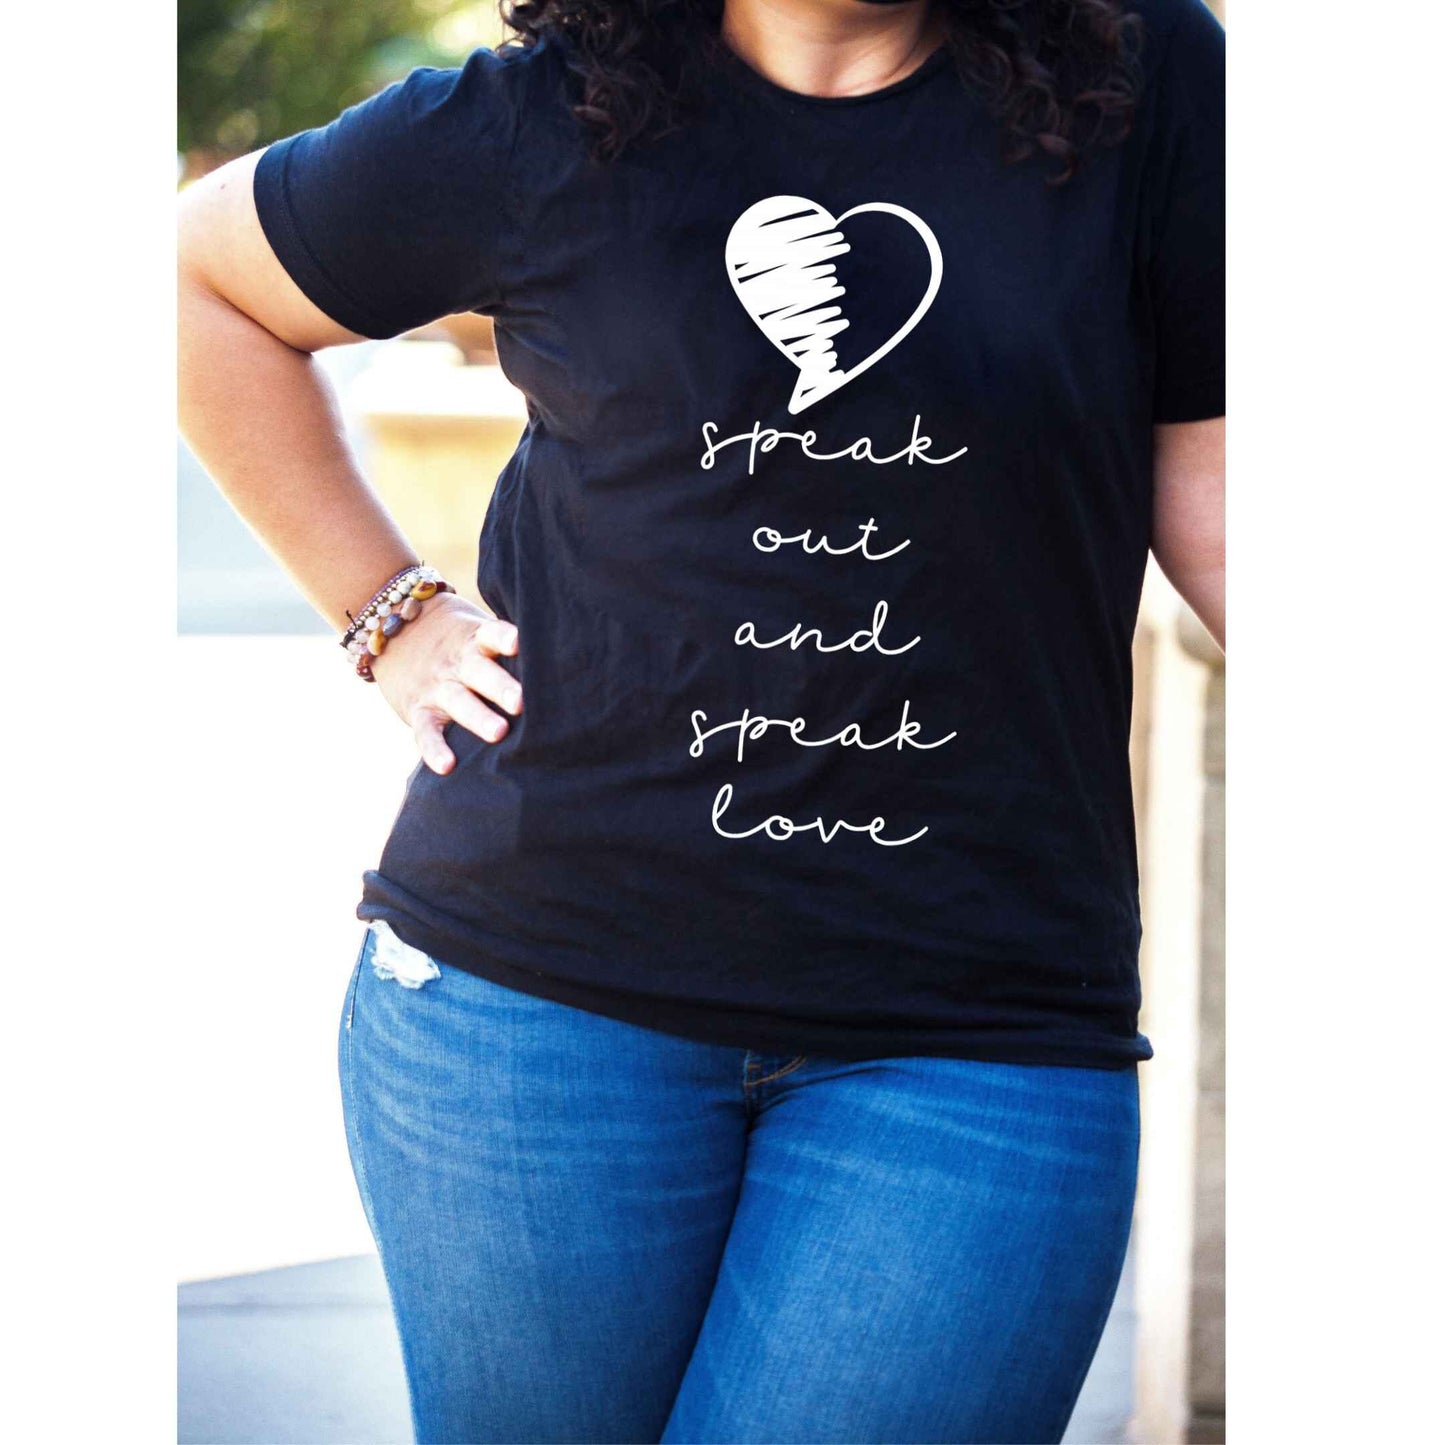 Speak Out and Speak Love unisex t-shirt • super soft tees for women • social justice shirt